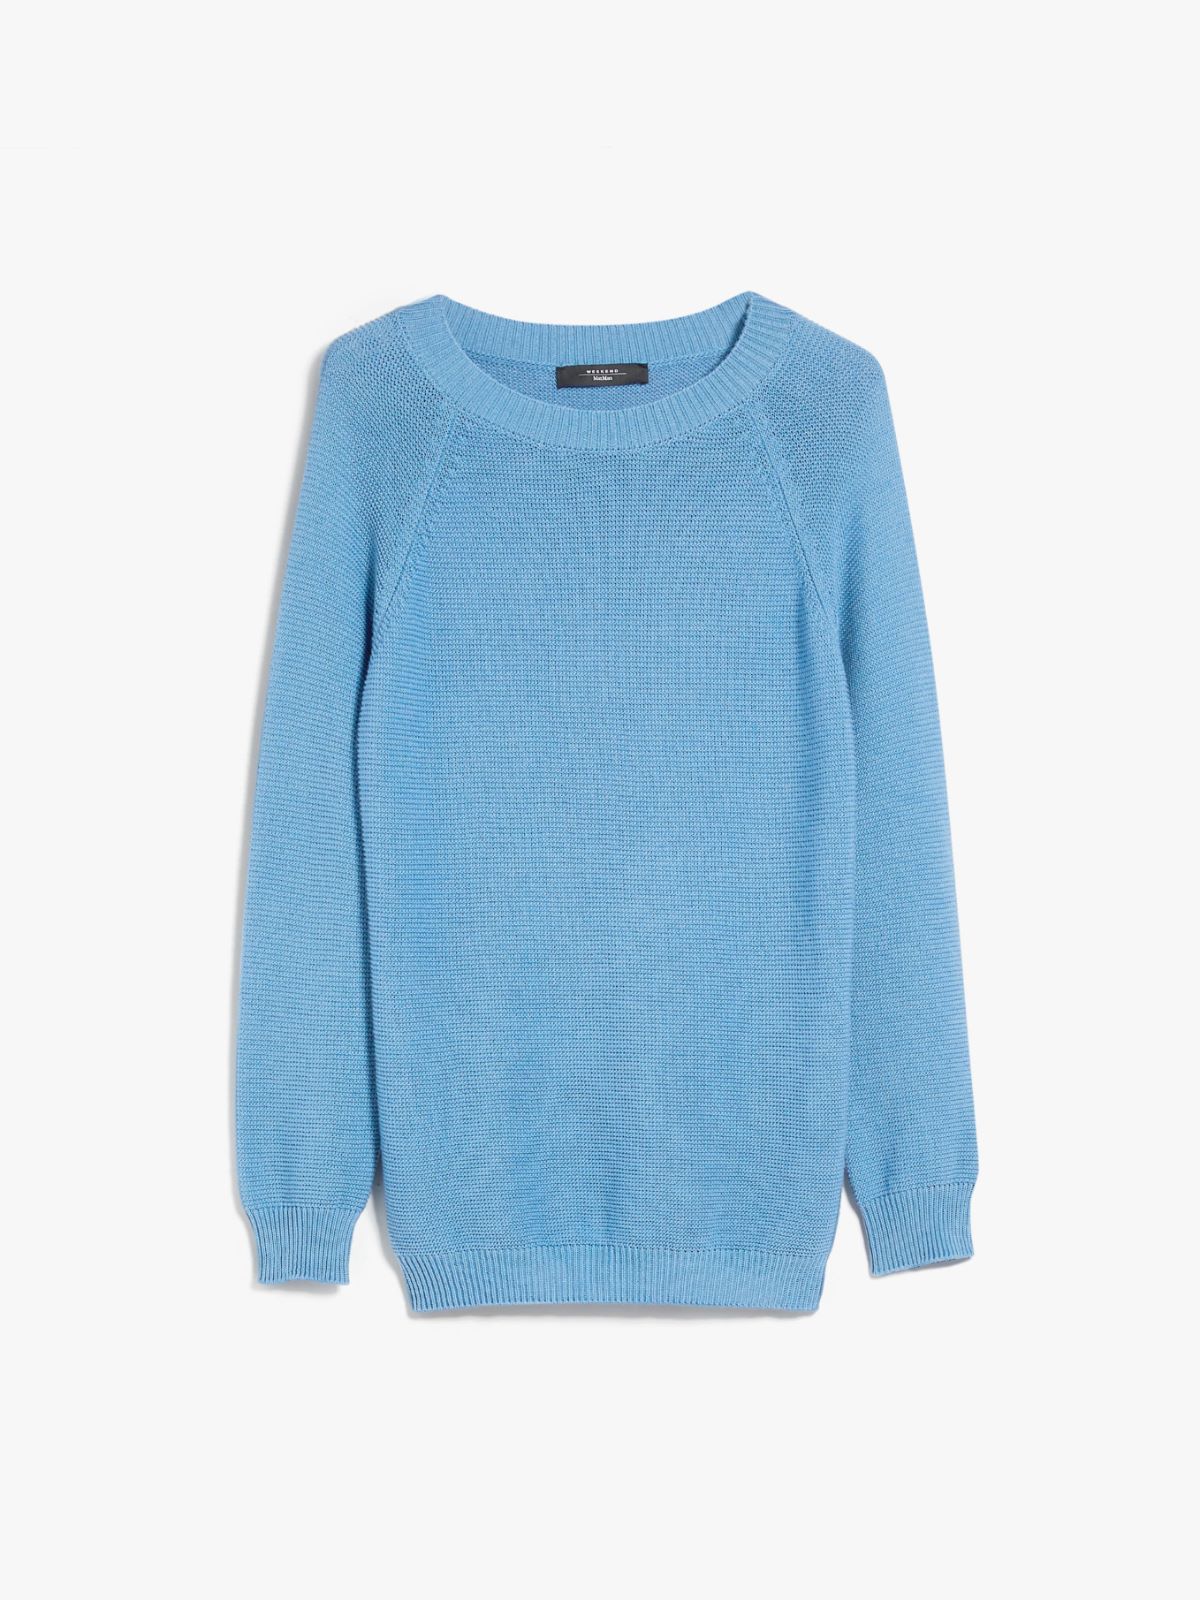 Relaxed-fit cotton sweater, sky blue | Weekend Max Mara